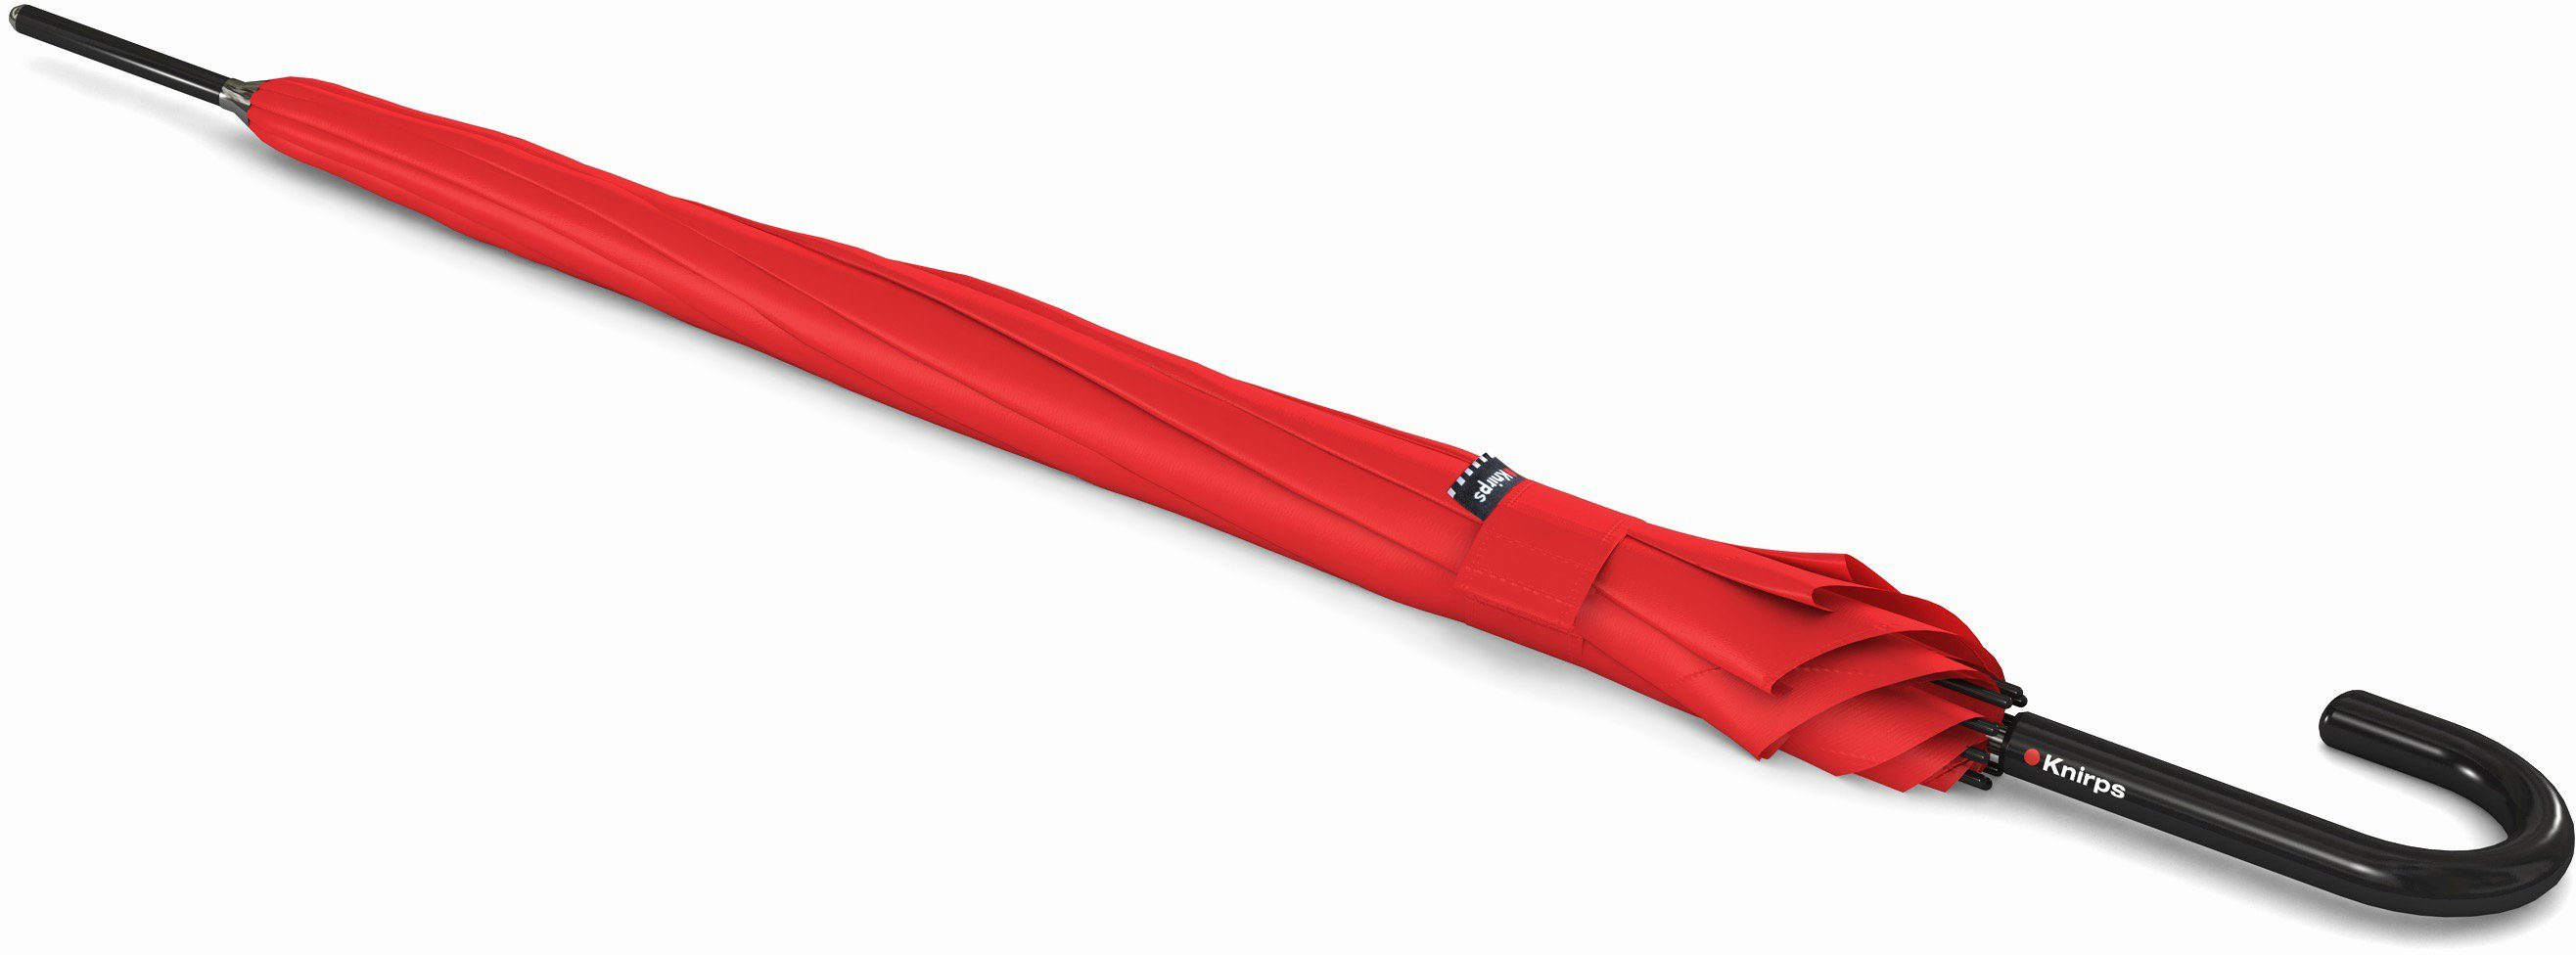 A.760 Stick Stockregenschirm Red Knirps® Automatic,